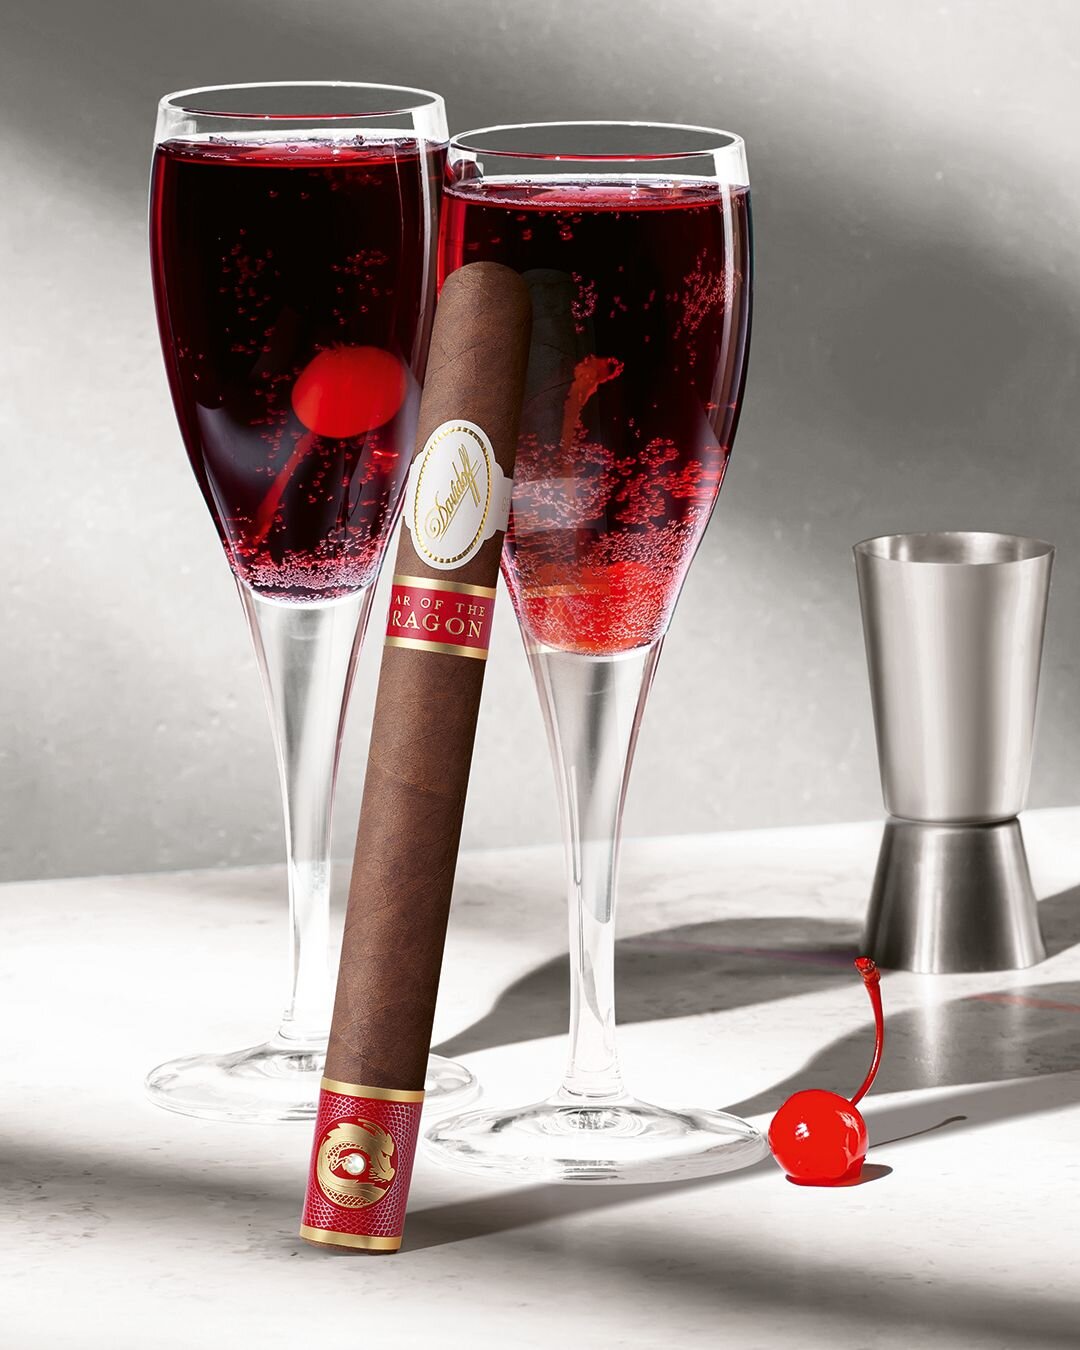 The Davidoff Year of the Dragon Limited Edition cigar leaning against one of two glasses filled with Kir Royale cocktail.